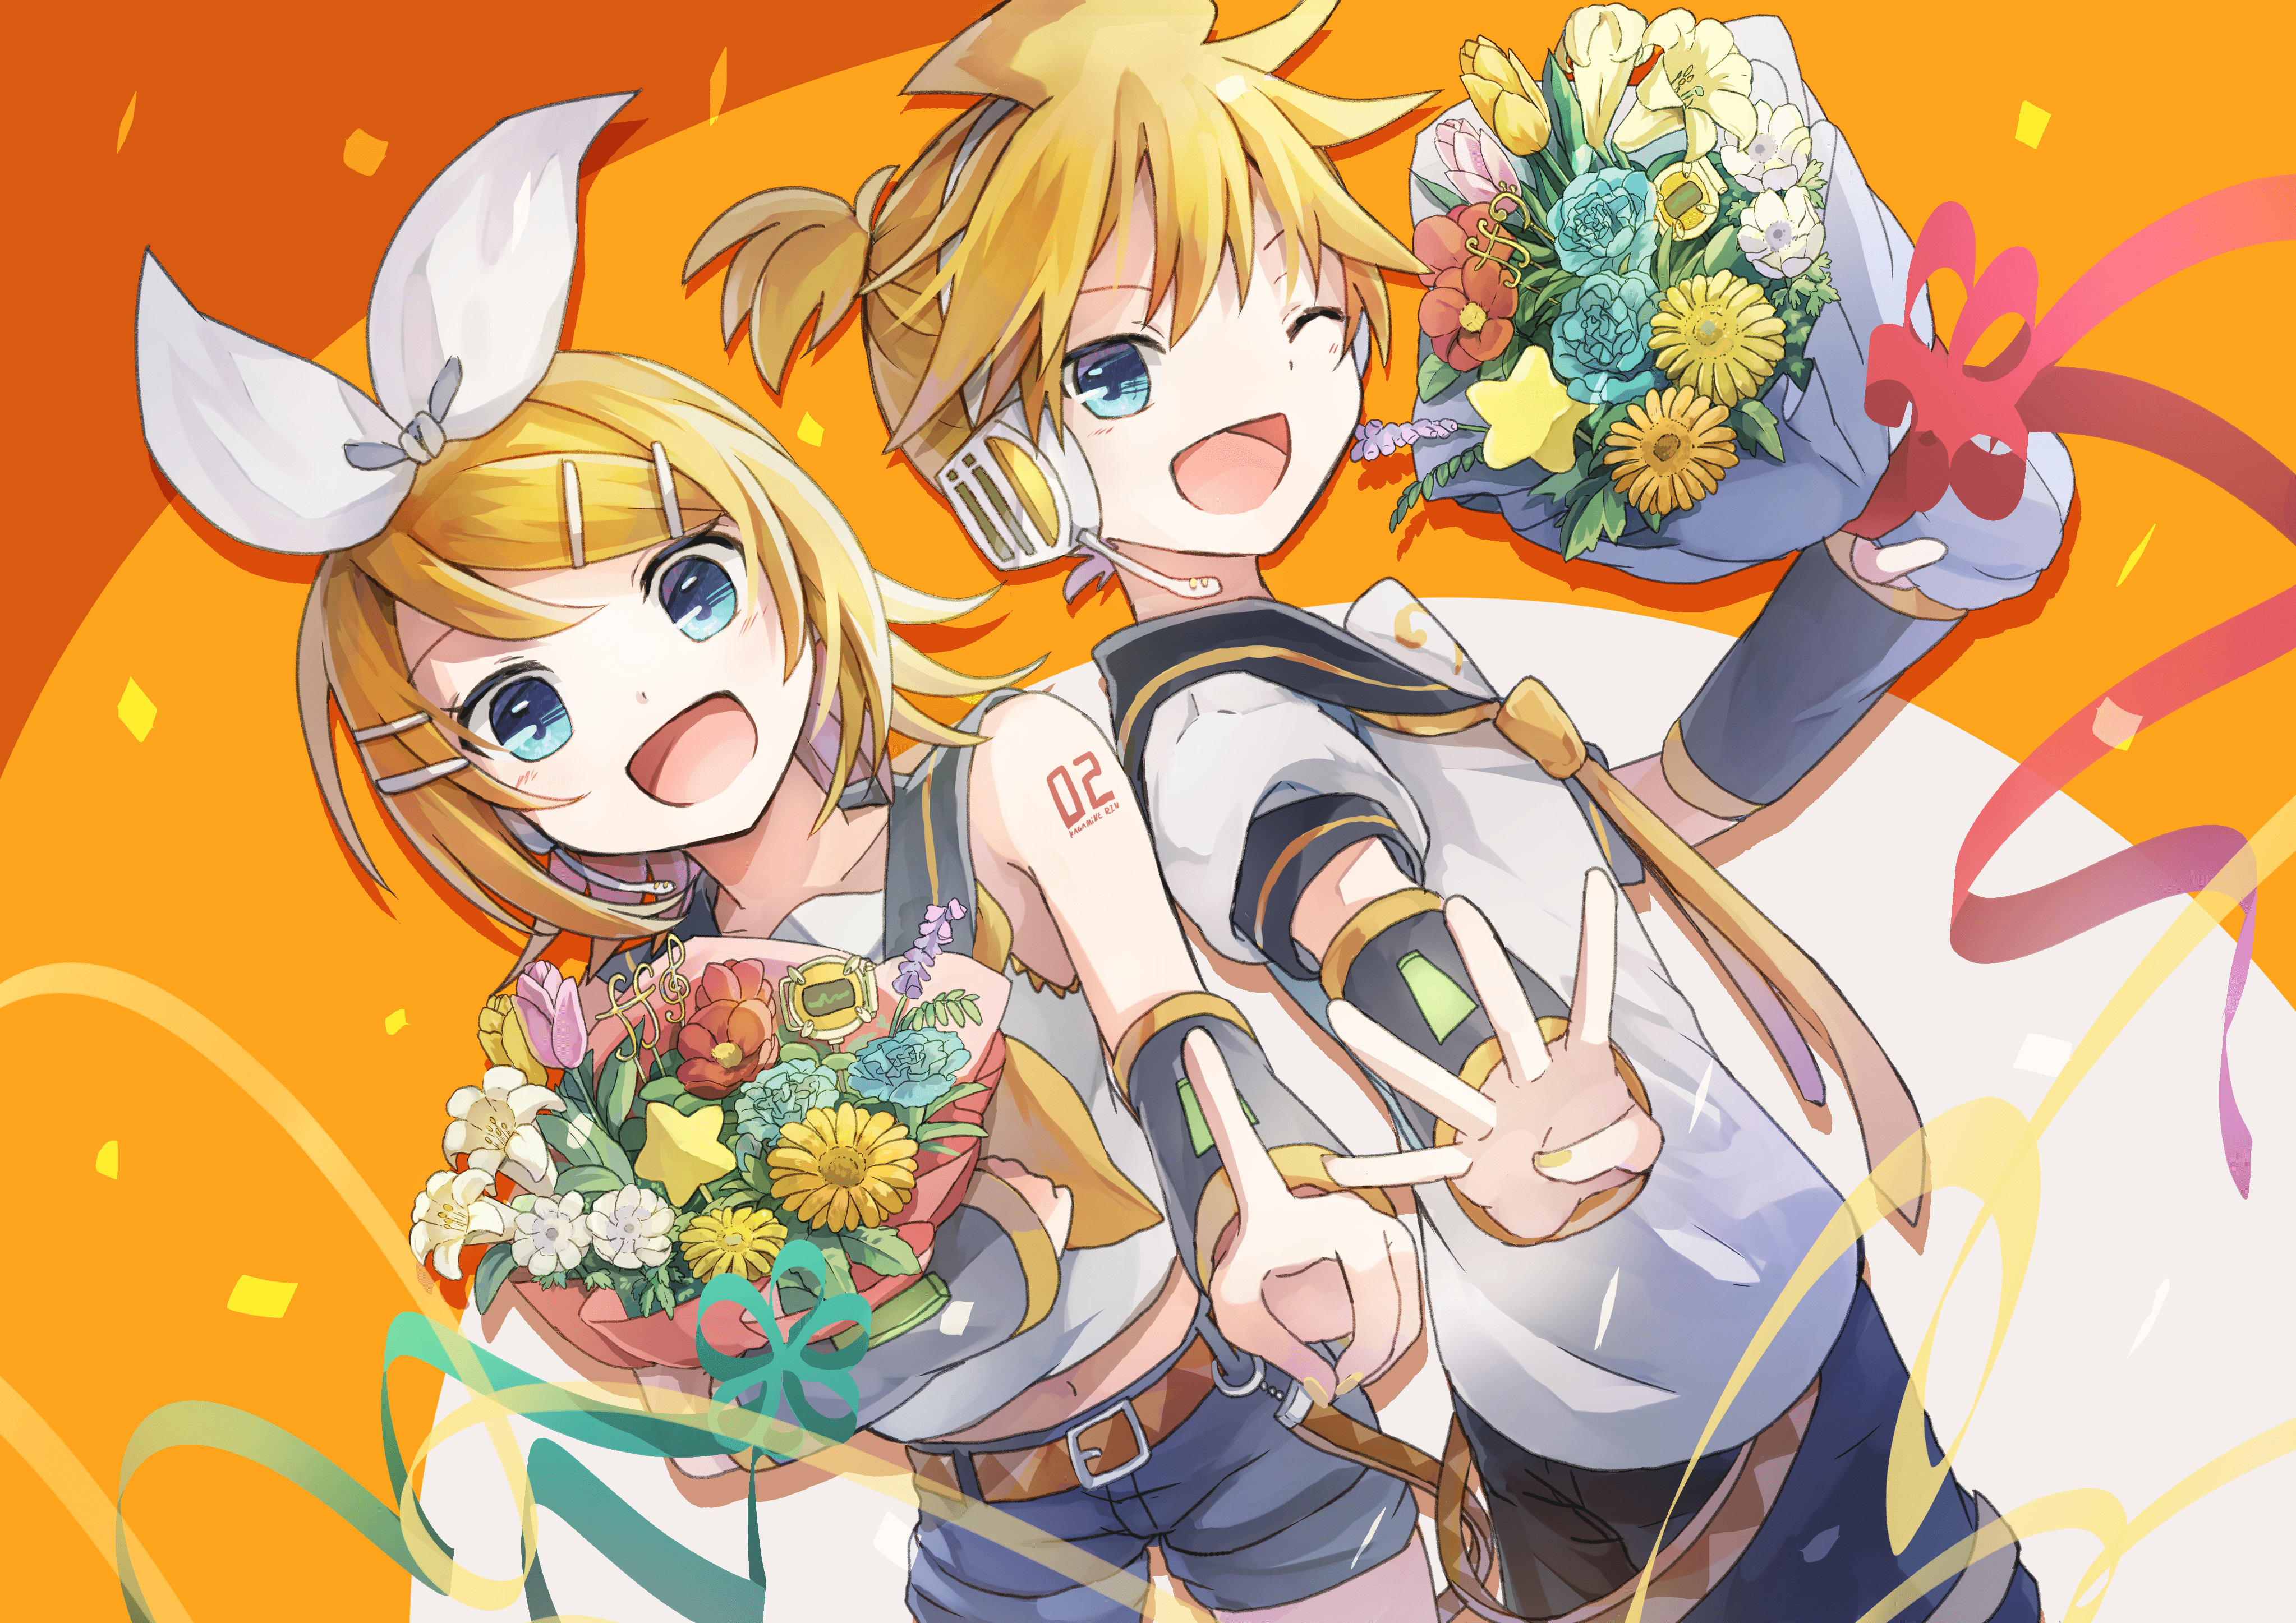 Kagamine Rin and Len holding flowers and giving a peace sign - 